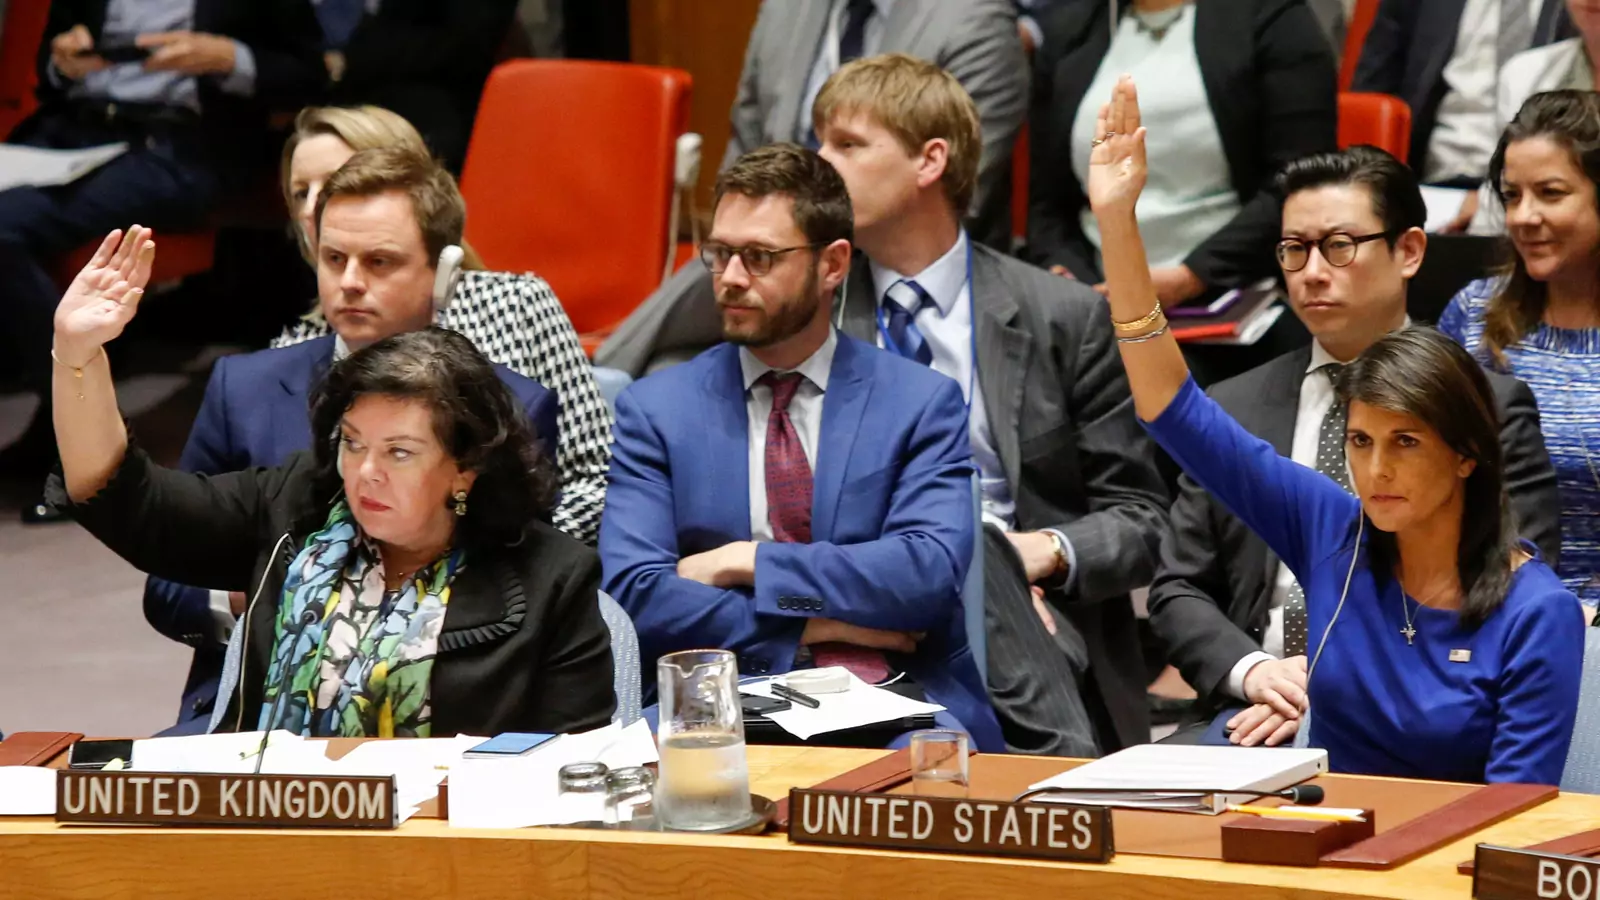 U.S. Ambassador Nikki Haley and UK Ambassador Karen Pierce vote against a Russian resolution condemning “aggression” against Syria during an emergency UN Security Council meeting.